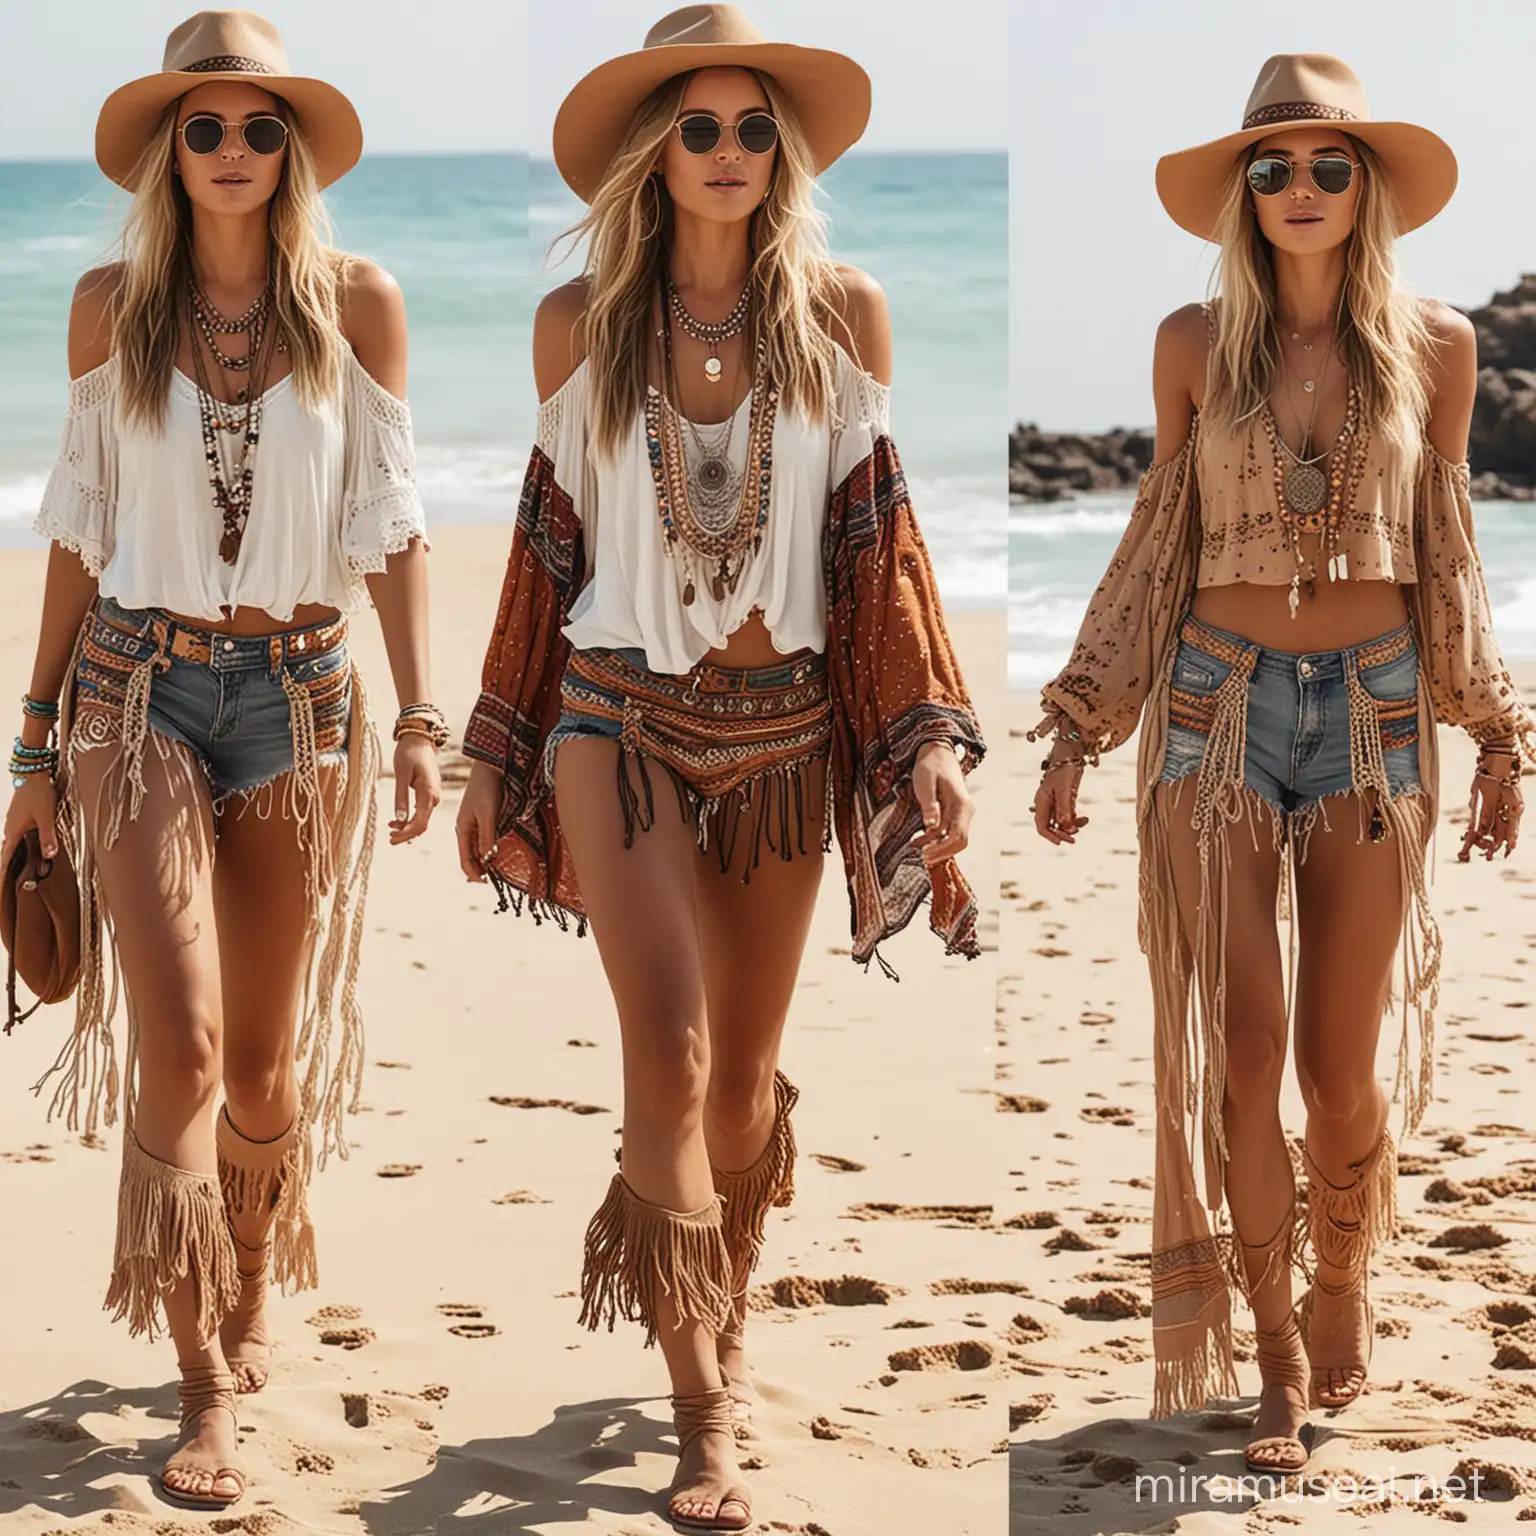 Bohemian Hippie Woman on Beach Fashion Trends and Relaxation